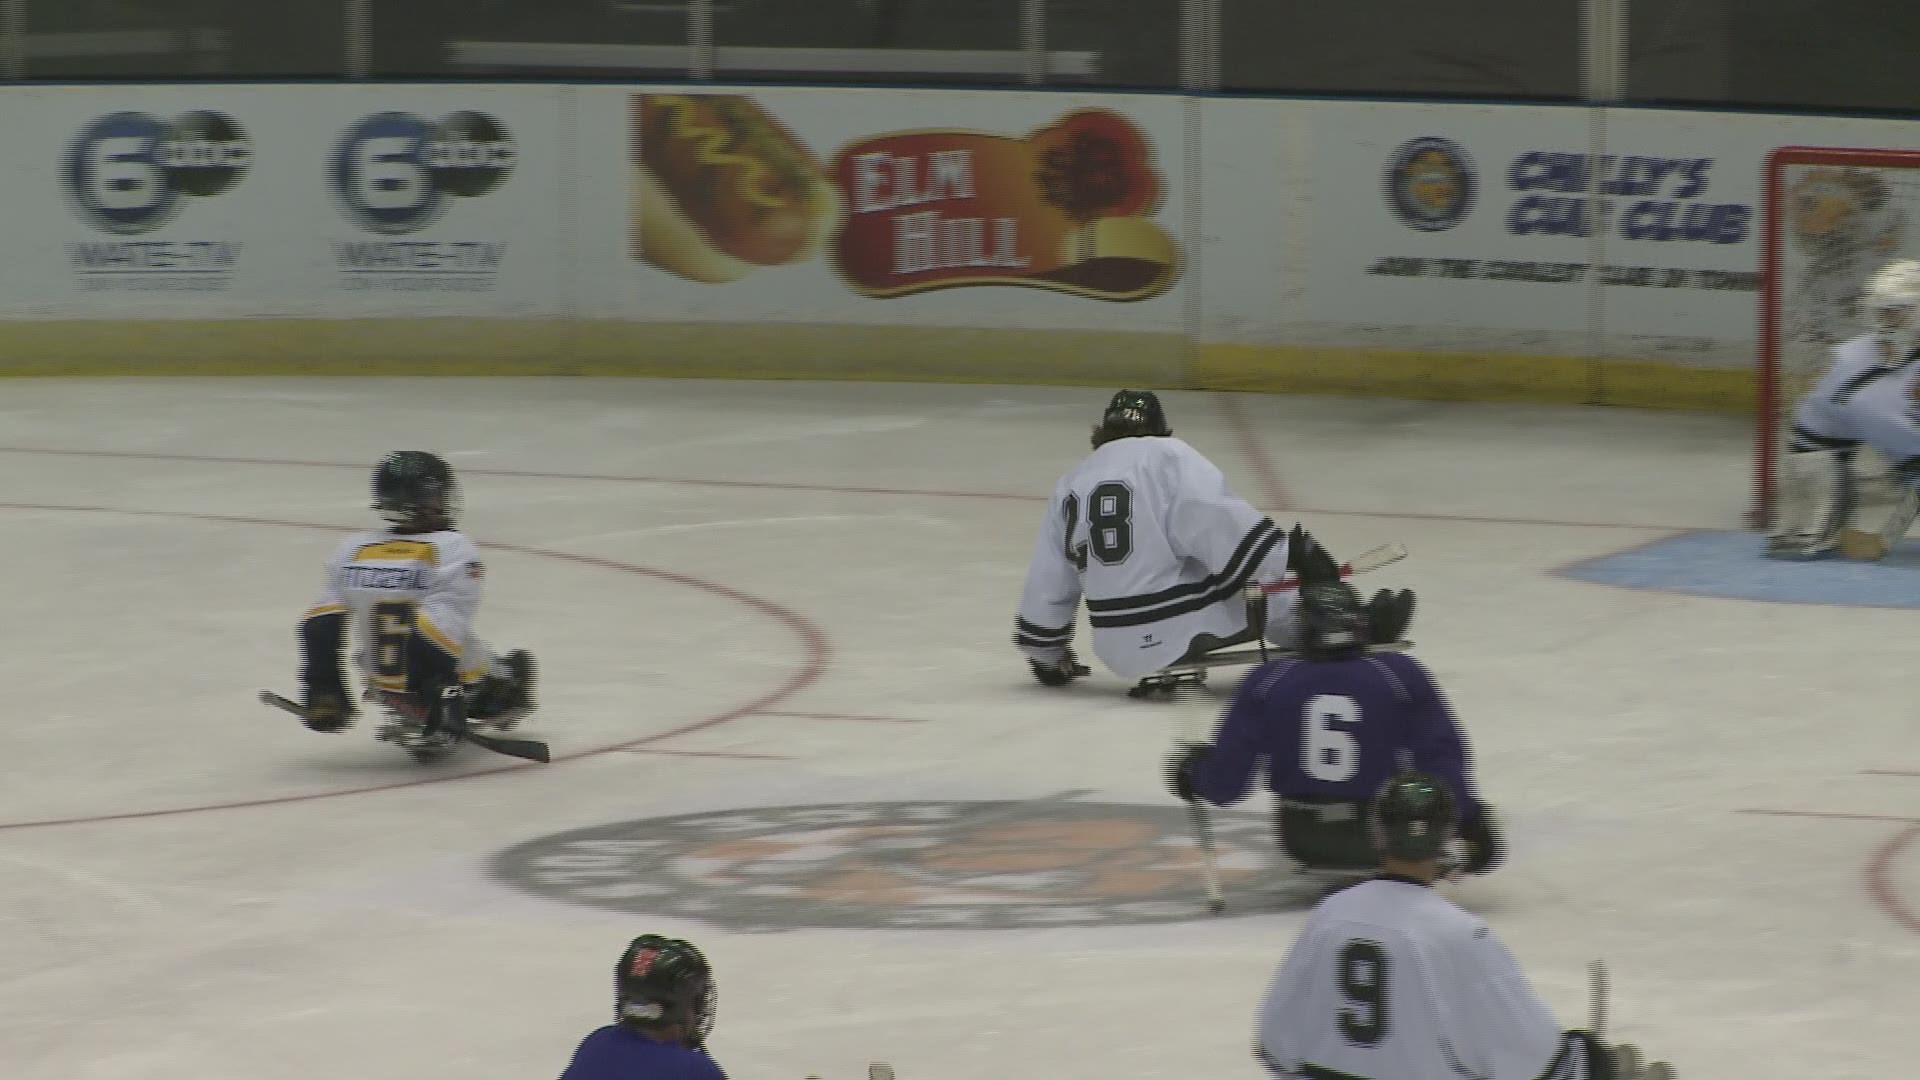 The Ice Bears played the Sled Bears in a sled hockey exhibition game. The Sled Bears won 9-2.